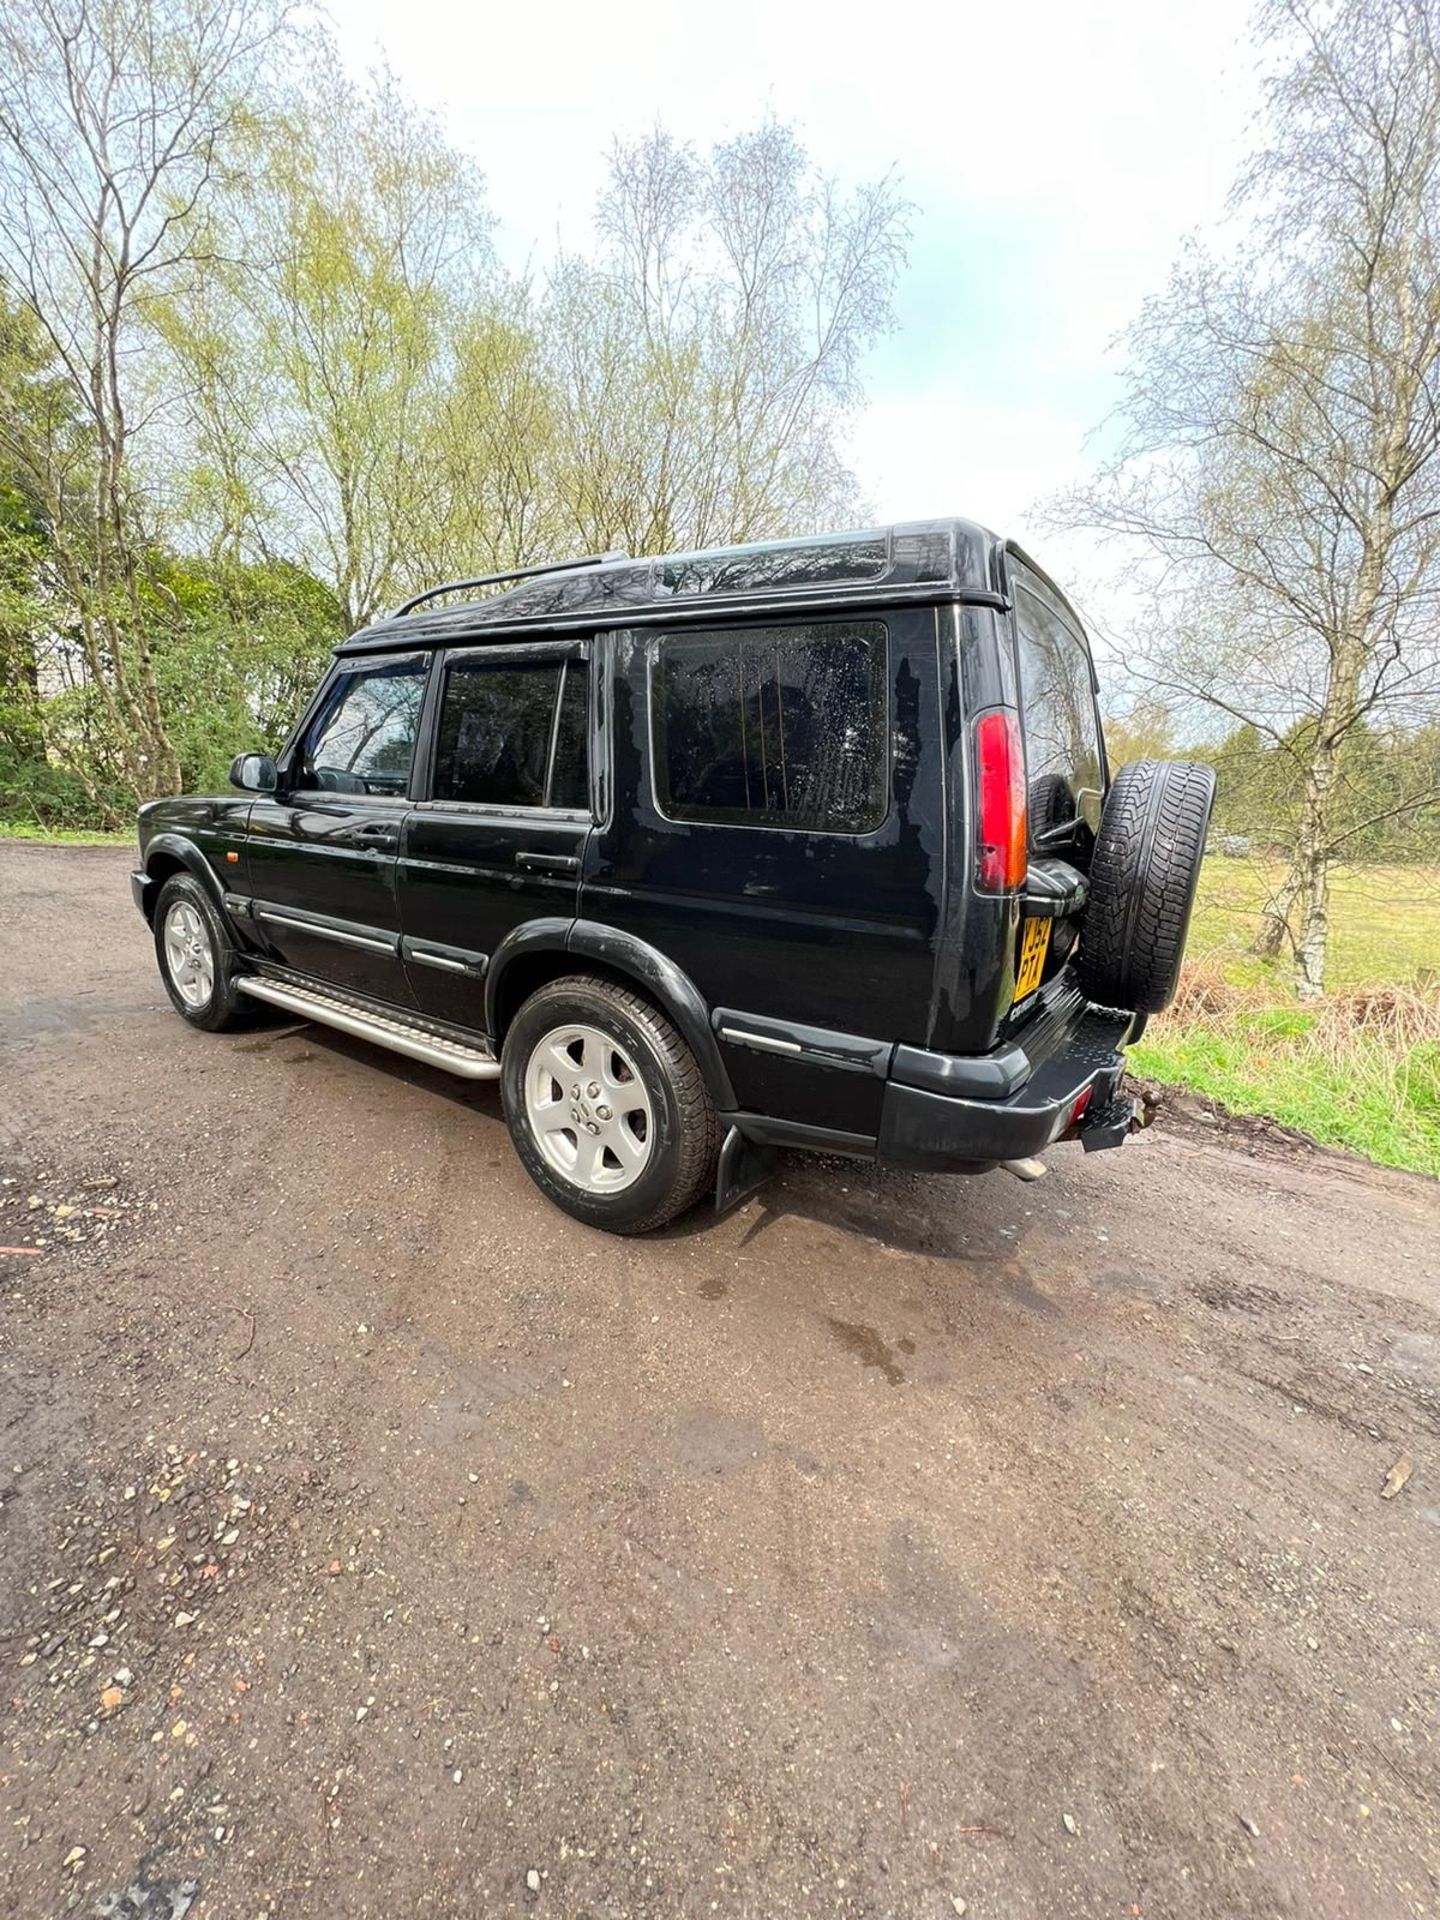 2002 52 PLATE LAND ROVER DISCOVERY 2 SUV ESTATE - TD5 - TOP OF THE RANGE - HALF LEATHER SEATS - Image 6 of 15